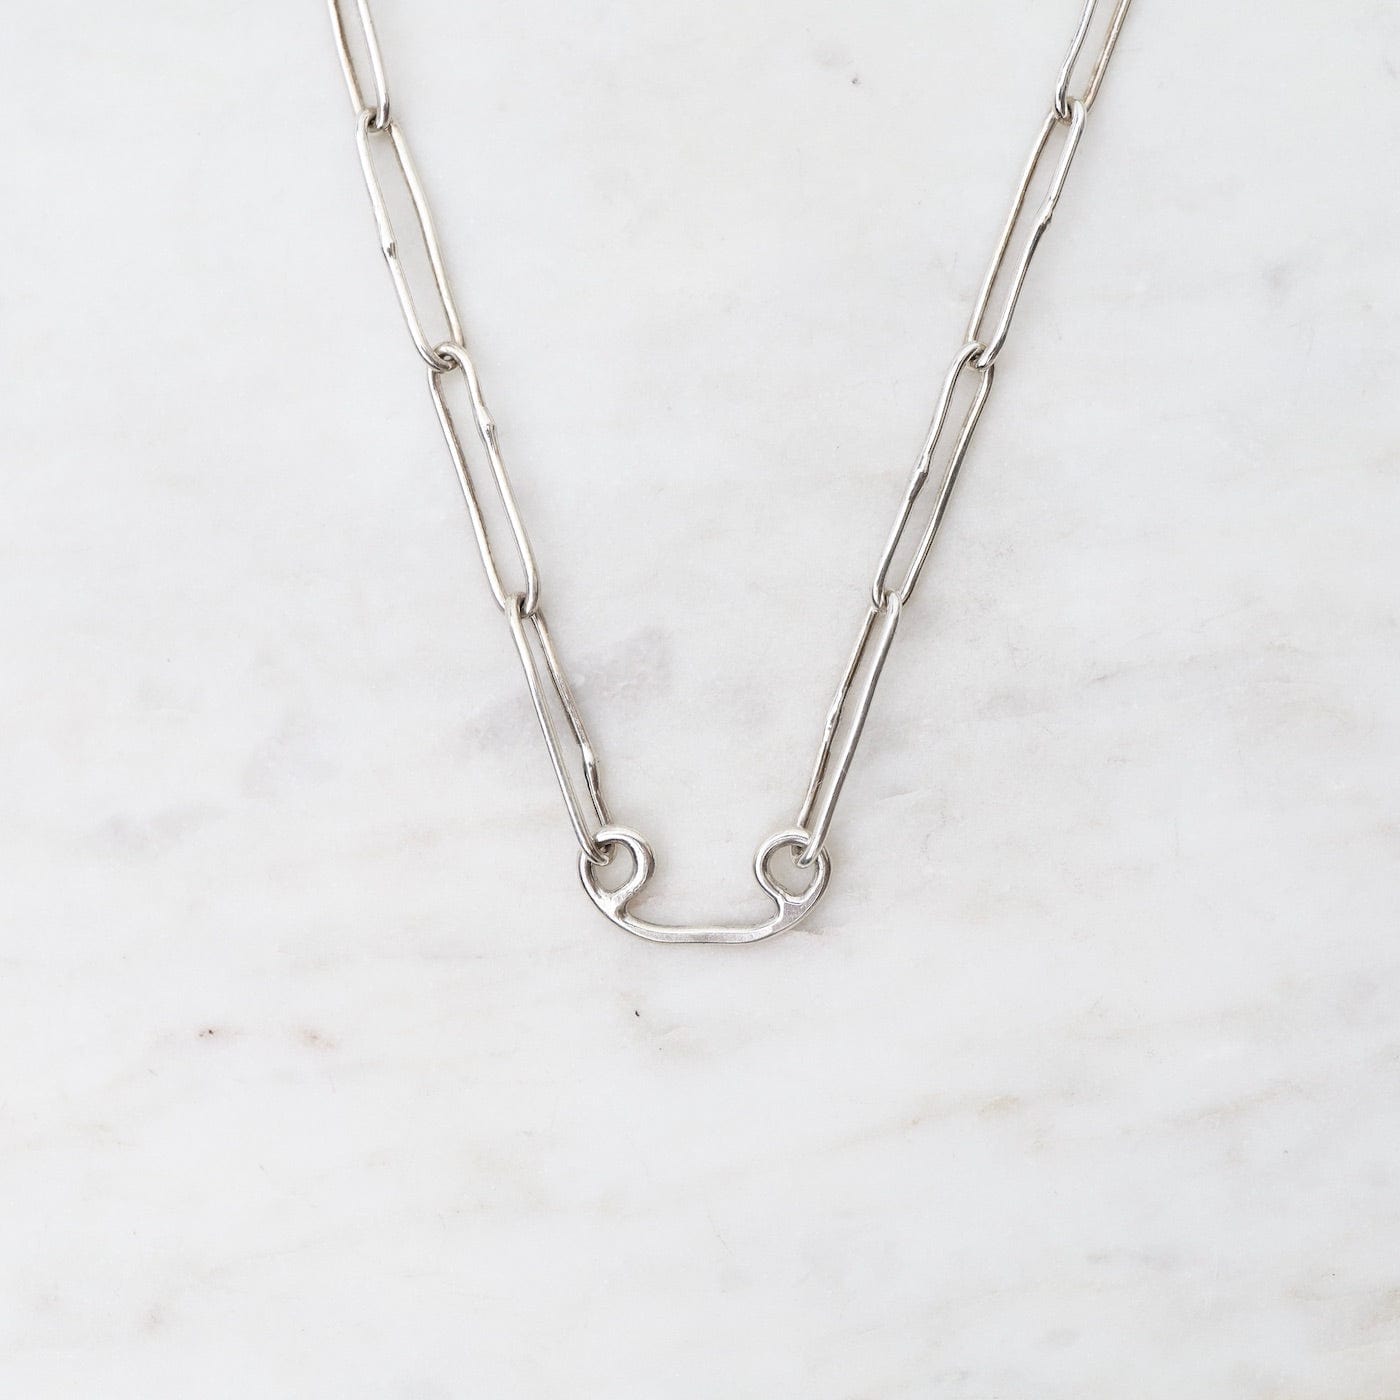 NKL 20" Sterling Silver Smooth Long Oval Link Chain